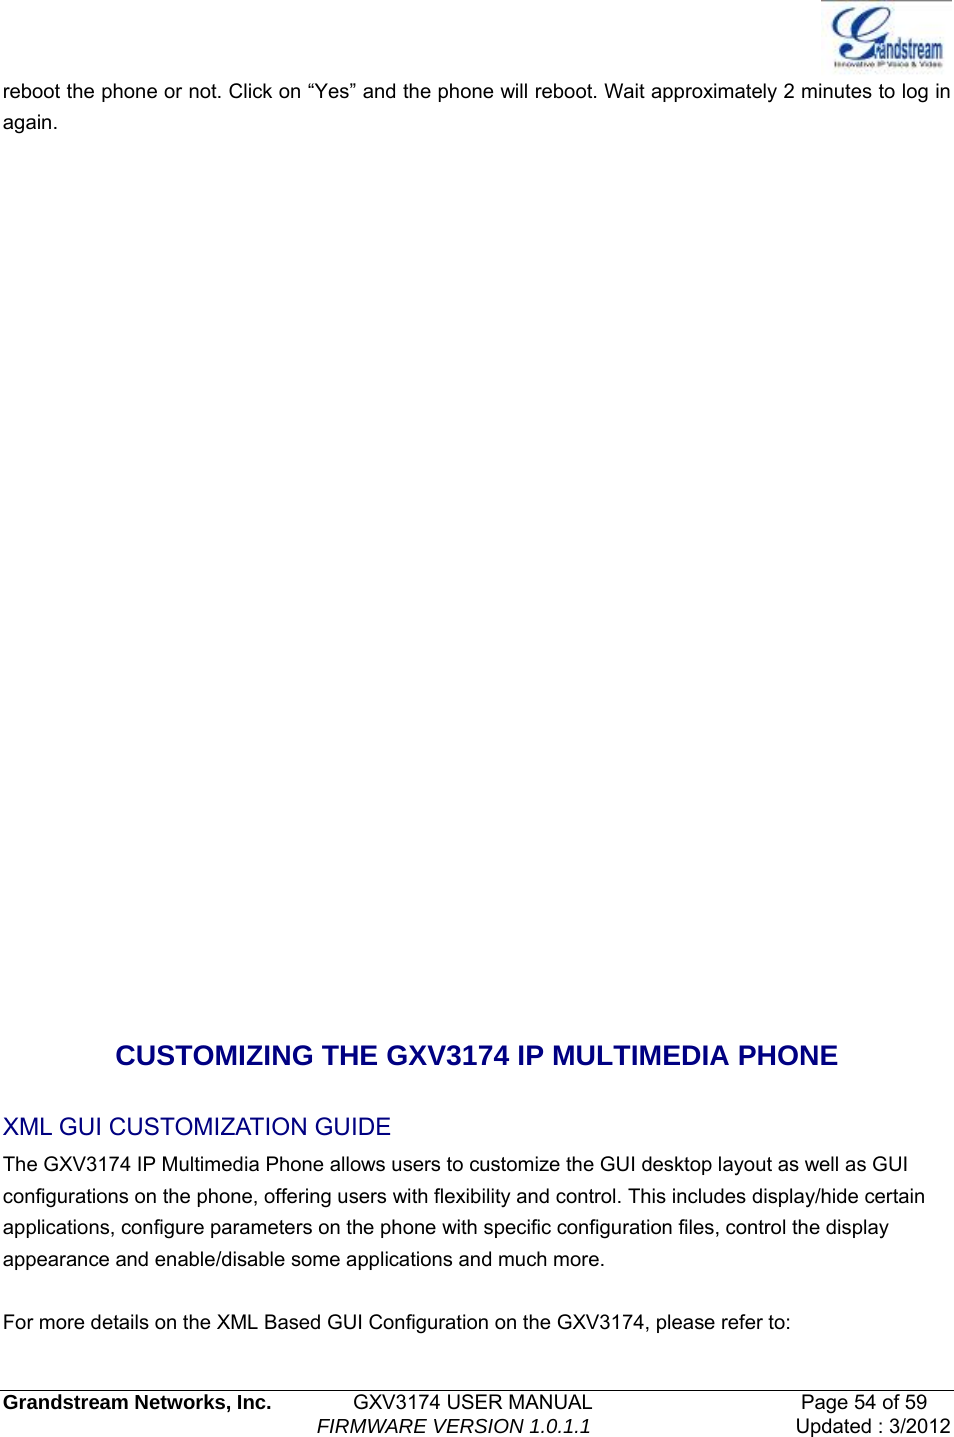   Grandstream Networks, Inc.        GXV3174 USER MANUAL                     Page 54 of 59                                FIRMWARE VERSION 1.0.1.1  Updated : 3/2012  reboot the phone or not. Click on “Yes” and the phone will reboot. Wait approximately 2 minutes to log in again.                CUSTOMIZING THE GXV3174 IP MULTIMEDIA PHONE XML GUI CUSTOMIZATION GUIDE The GXV3174 IP Multimedia Phone allows users to customize the GUI desktop layout as well as GUI configurations on the phone, offering users with flexibility and control. This includes display/hide certain applications, configure parameters on the phone with specific configuration files, control the display appearance and enable/disable some applications and much more.  For more details on the XML Based GUI Configuration on the GXV3174, please refer to: 